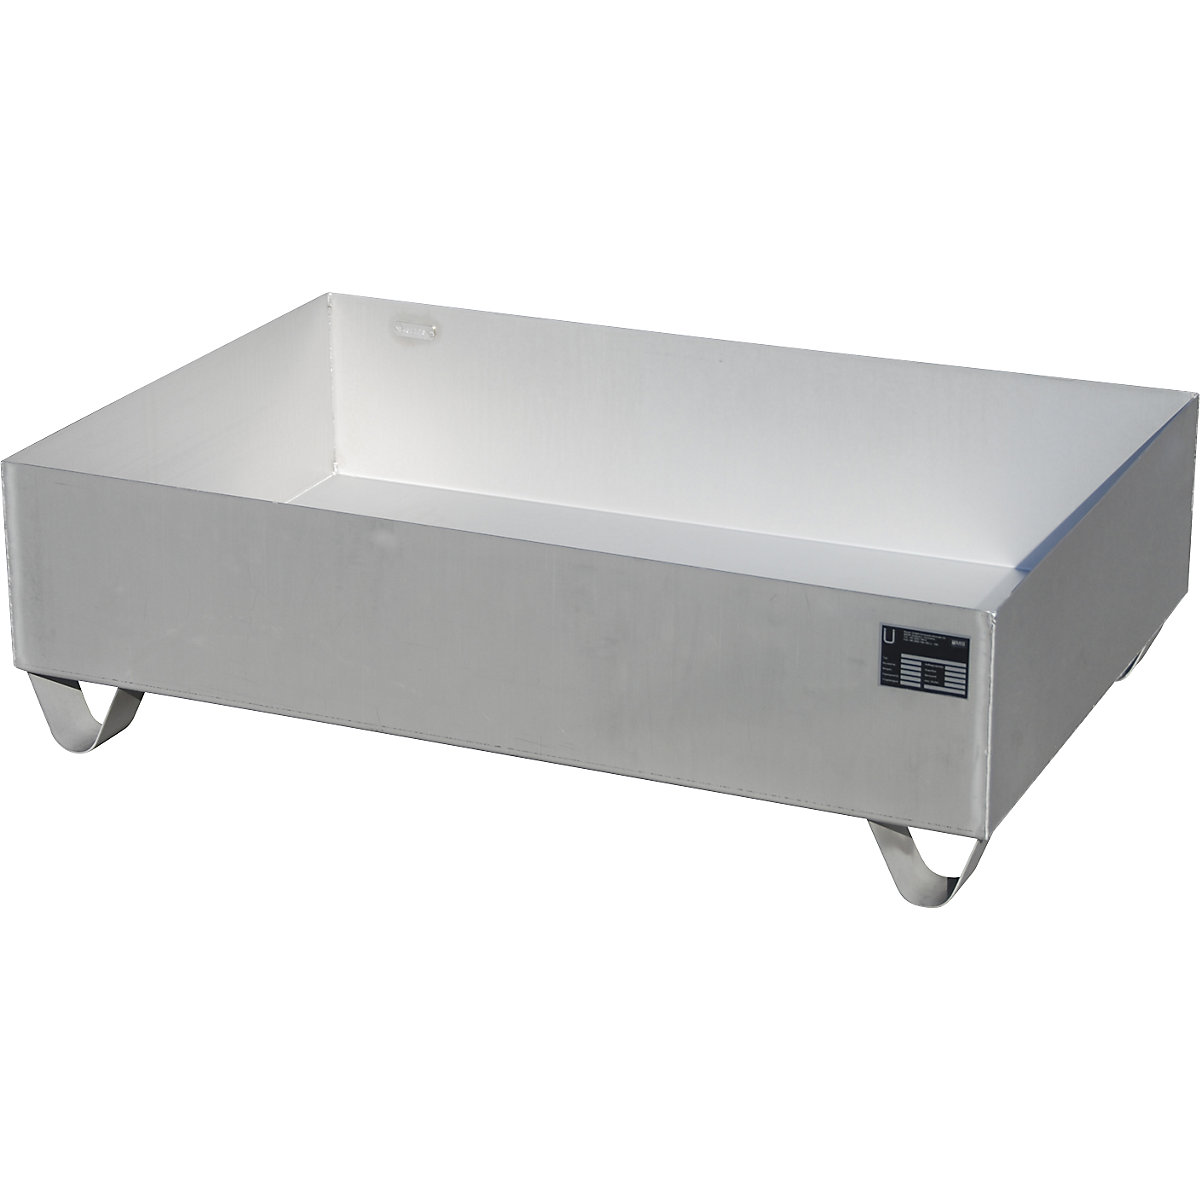 Stainless steel sump tray – eurokraft pro, for 200 l drums, 2 drums, LxWxH 1200 x 800 x 360 mm-1